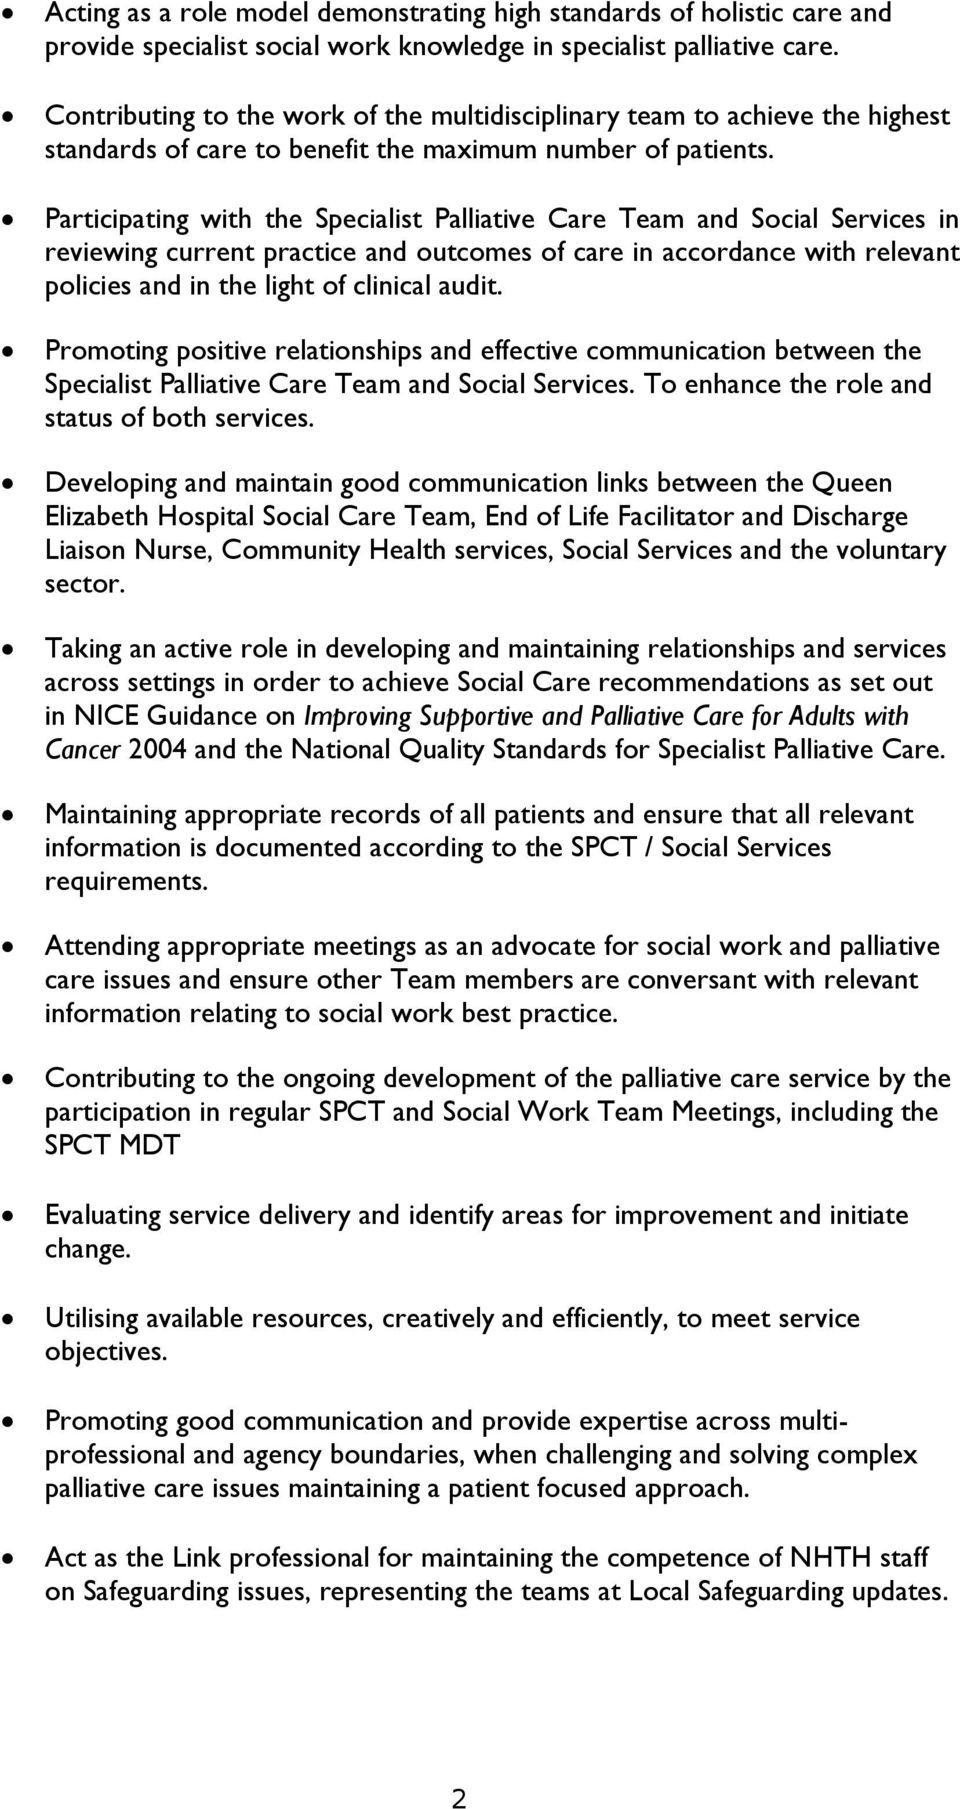 Participating with the Specialist Palliative Care Team and Social Services in reviewing current practice and outcomes of care in accordance with relevant policies and in the light of clinical audit.